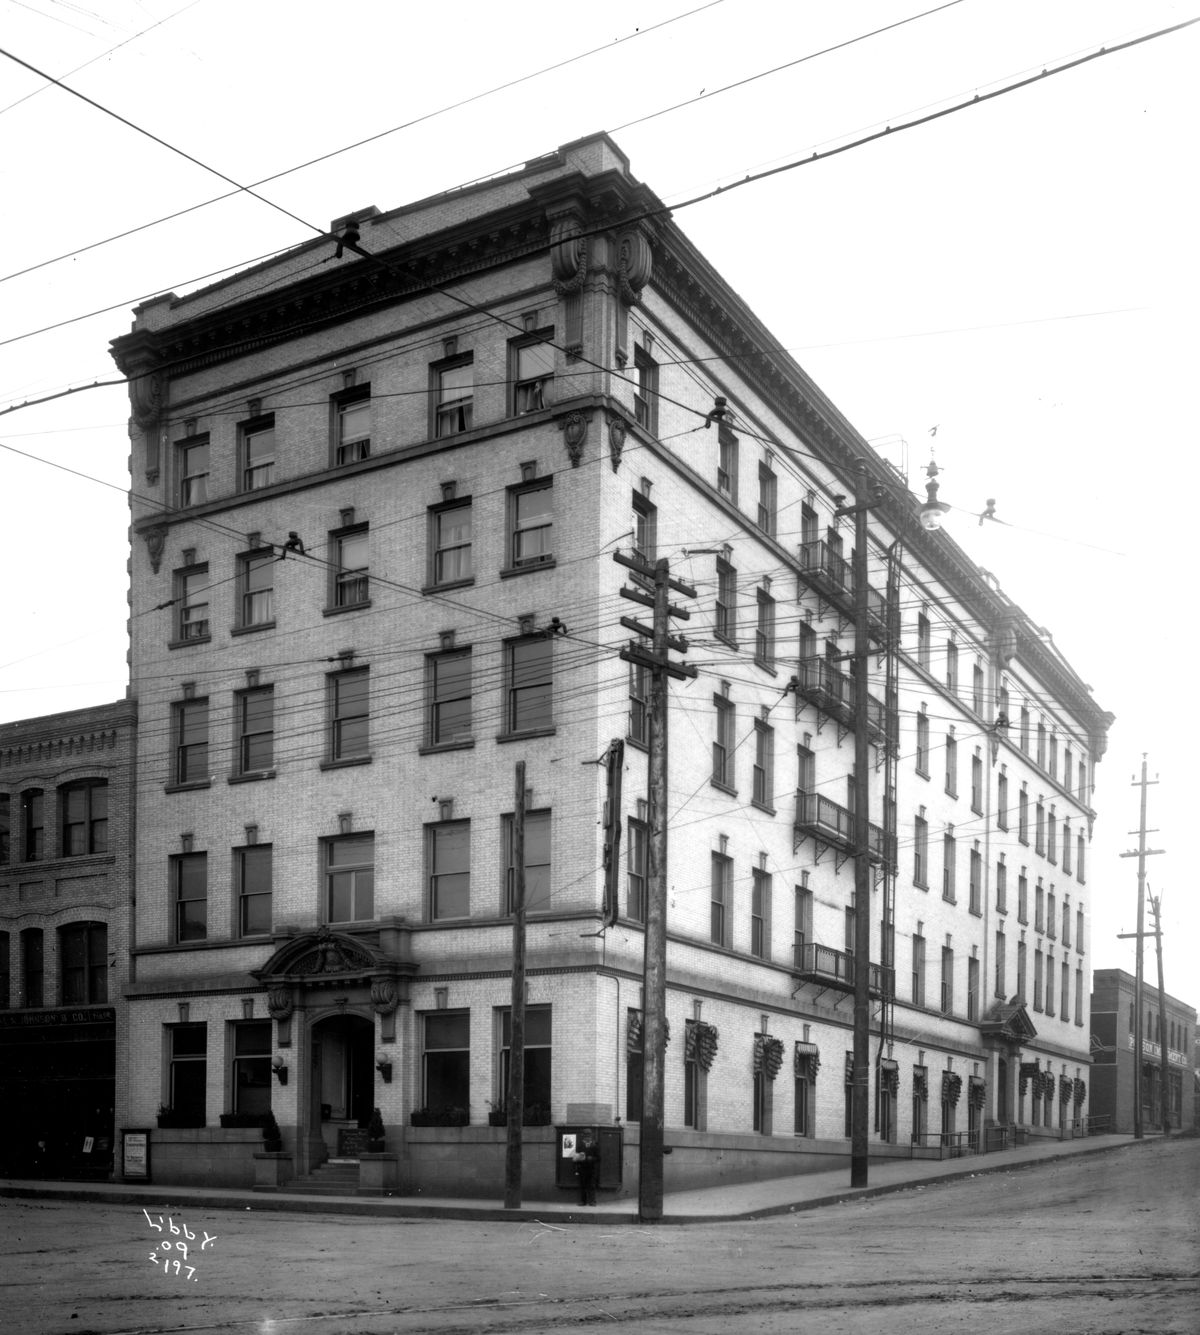 1909: The 1906 YMCA building at the corner of Lincoln Street and First Avenue. The interior held a gymnasium, running track, swimming pool, meeting rooms, apartments for rent and a restaurant. The building was retired and demolished in 1964, replaced with a building on Havermale Island. A motor hotel was built at this location shortly after. Over the years, the Y’s focus has gone from single young men to families and children, always with an emphasis on sports and fitness activities. (Libby Collection/Eastern Washington State Historical Society Archives)